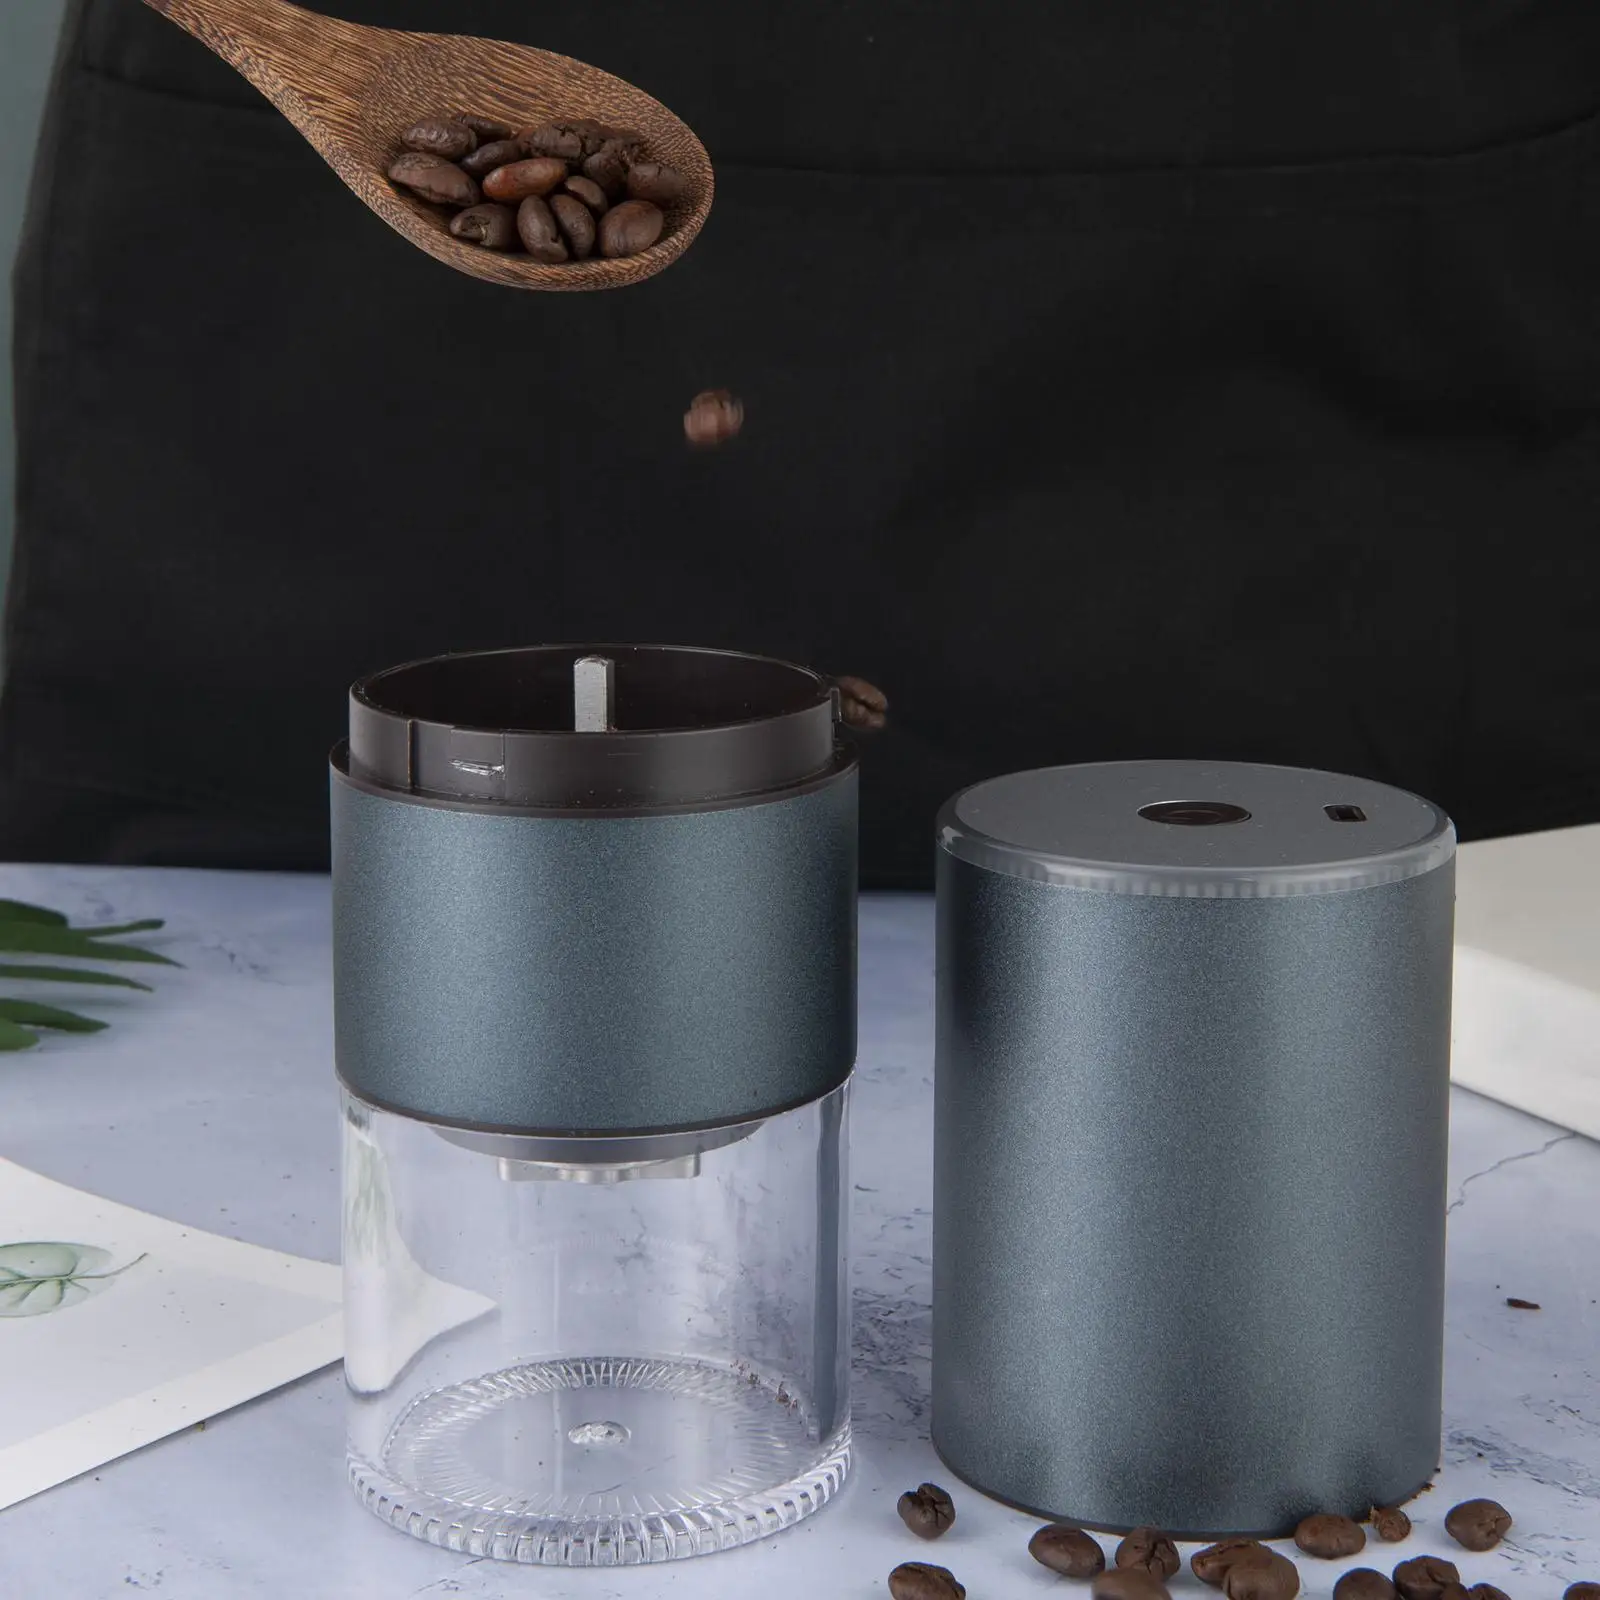 Small Coffee Bean Grinder Removable Bowl Stainless Steel Core Automatic Burr Coffee Grinder Electric Coffee Grinder for Hiking